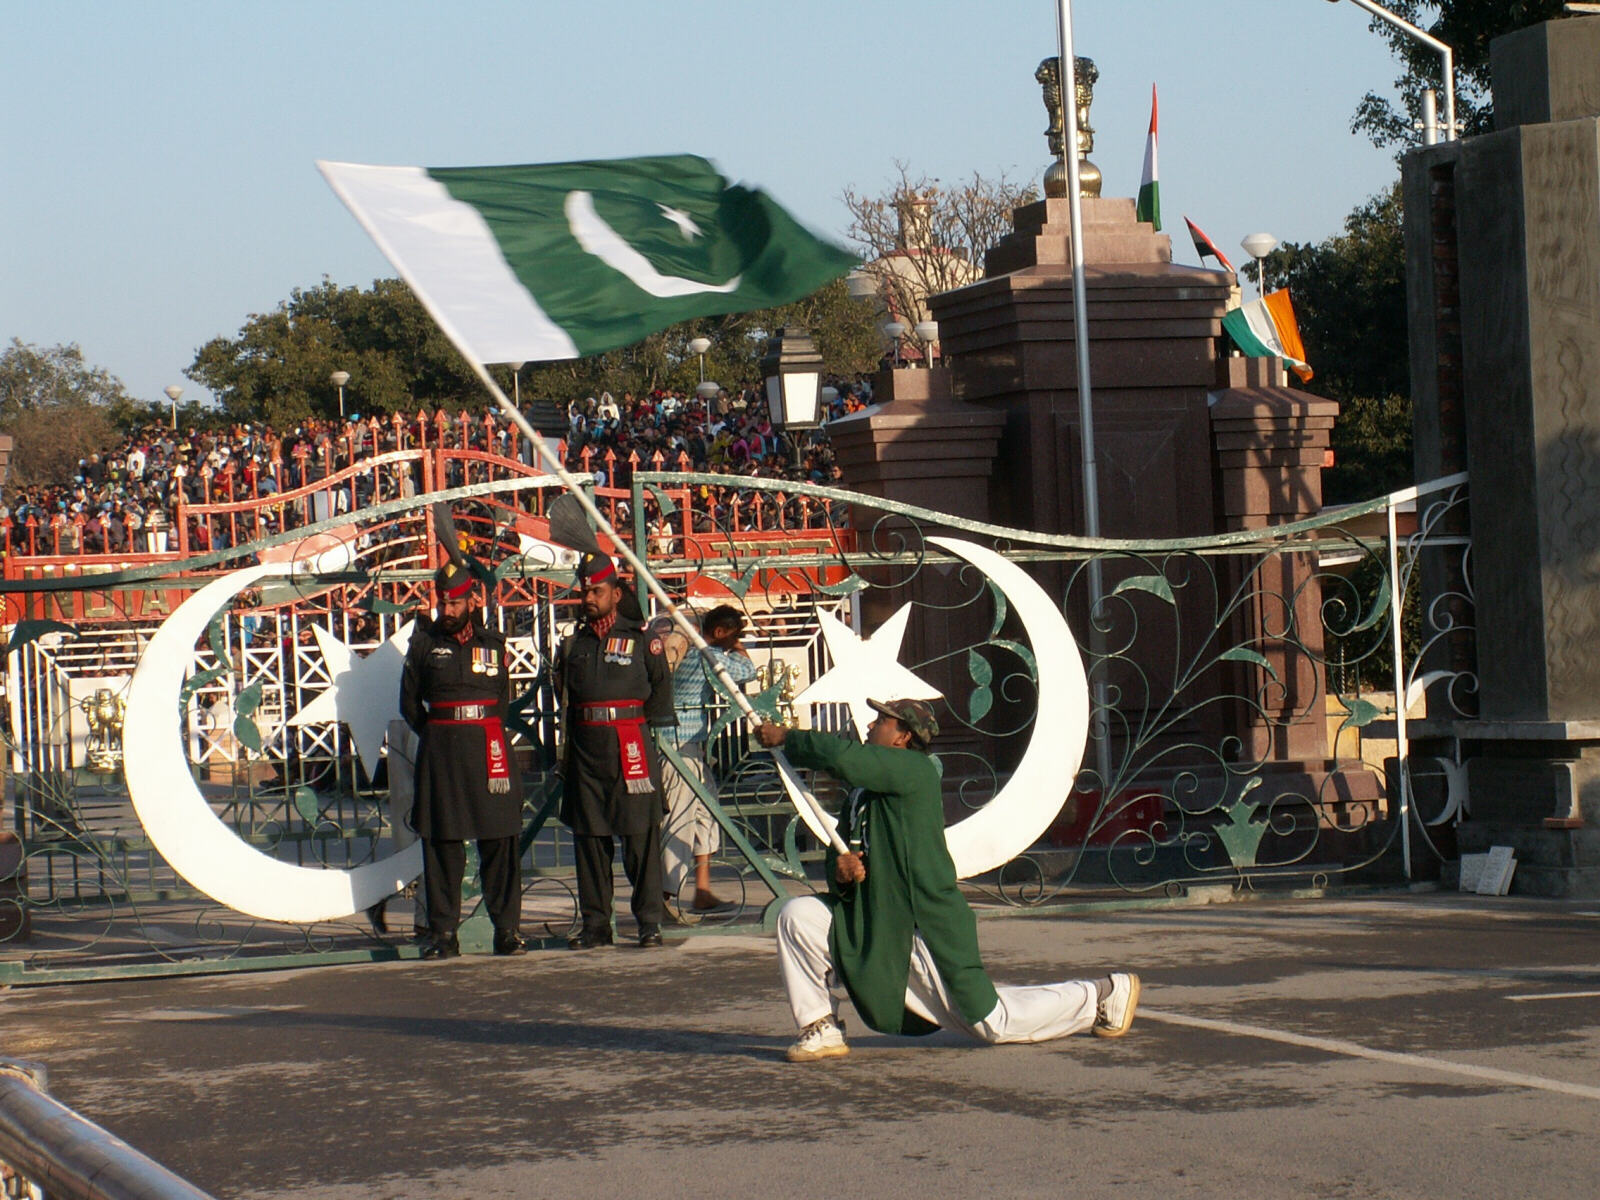 Closing ceremony at the Wagah border, Pakistan side